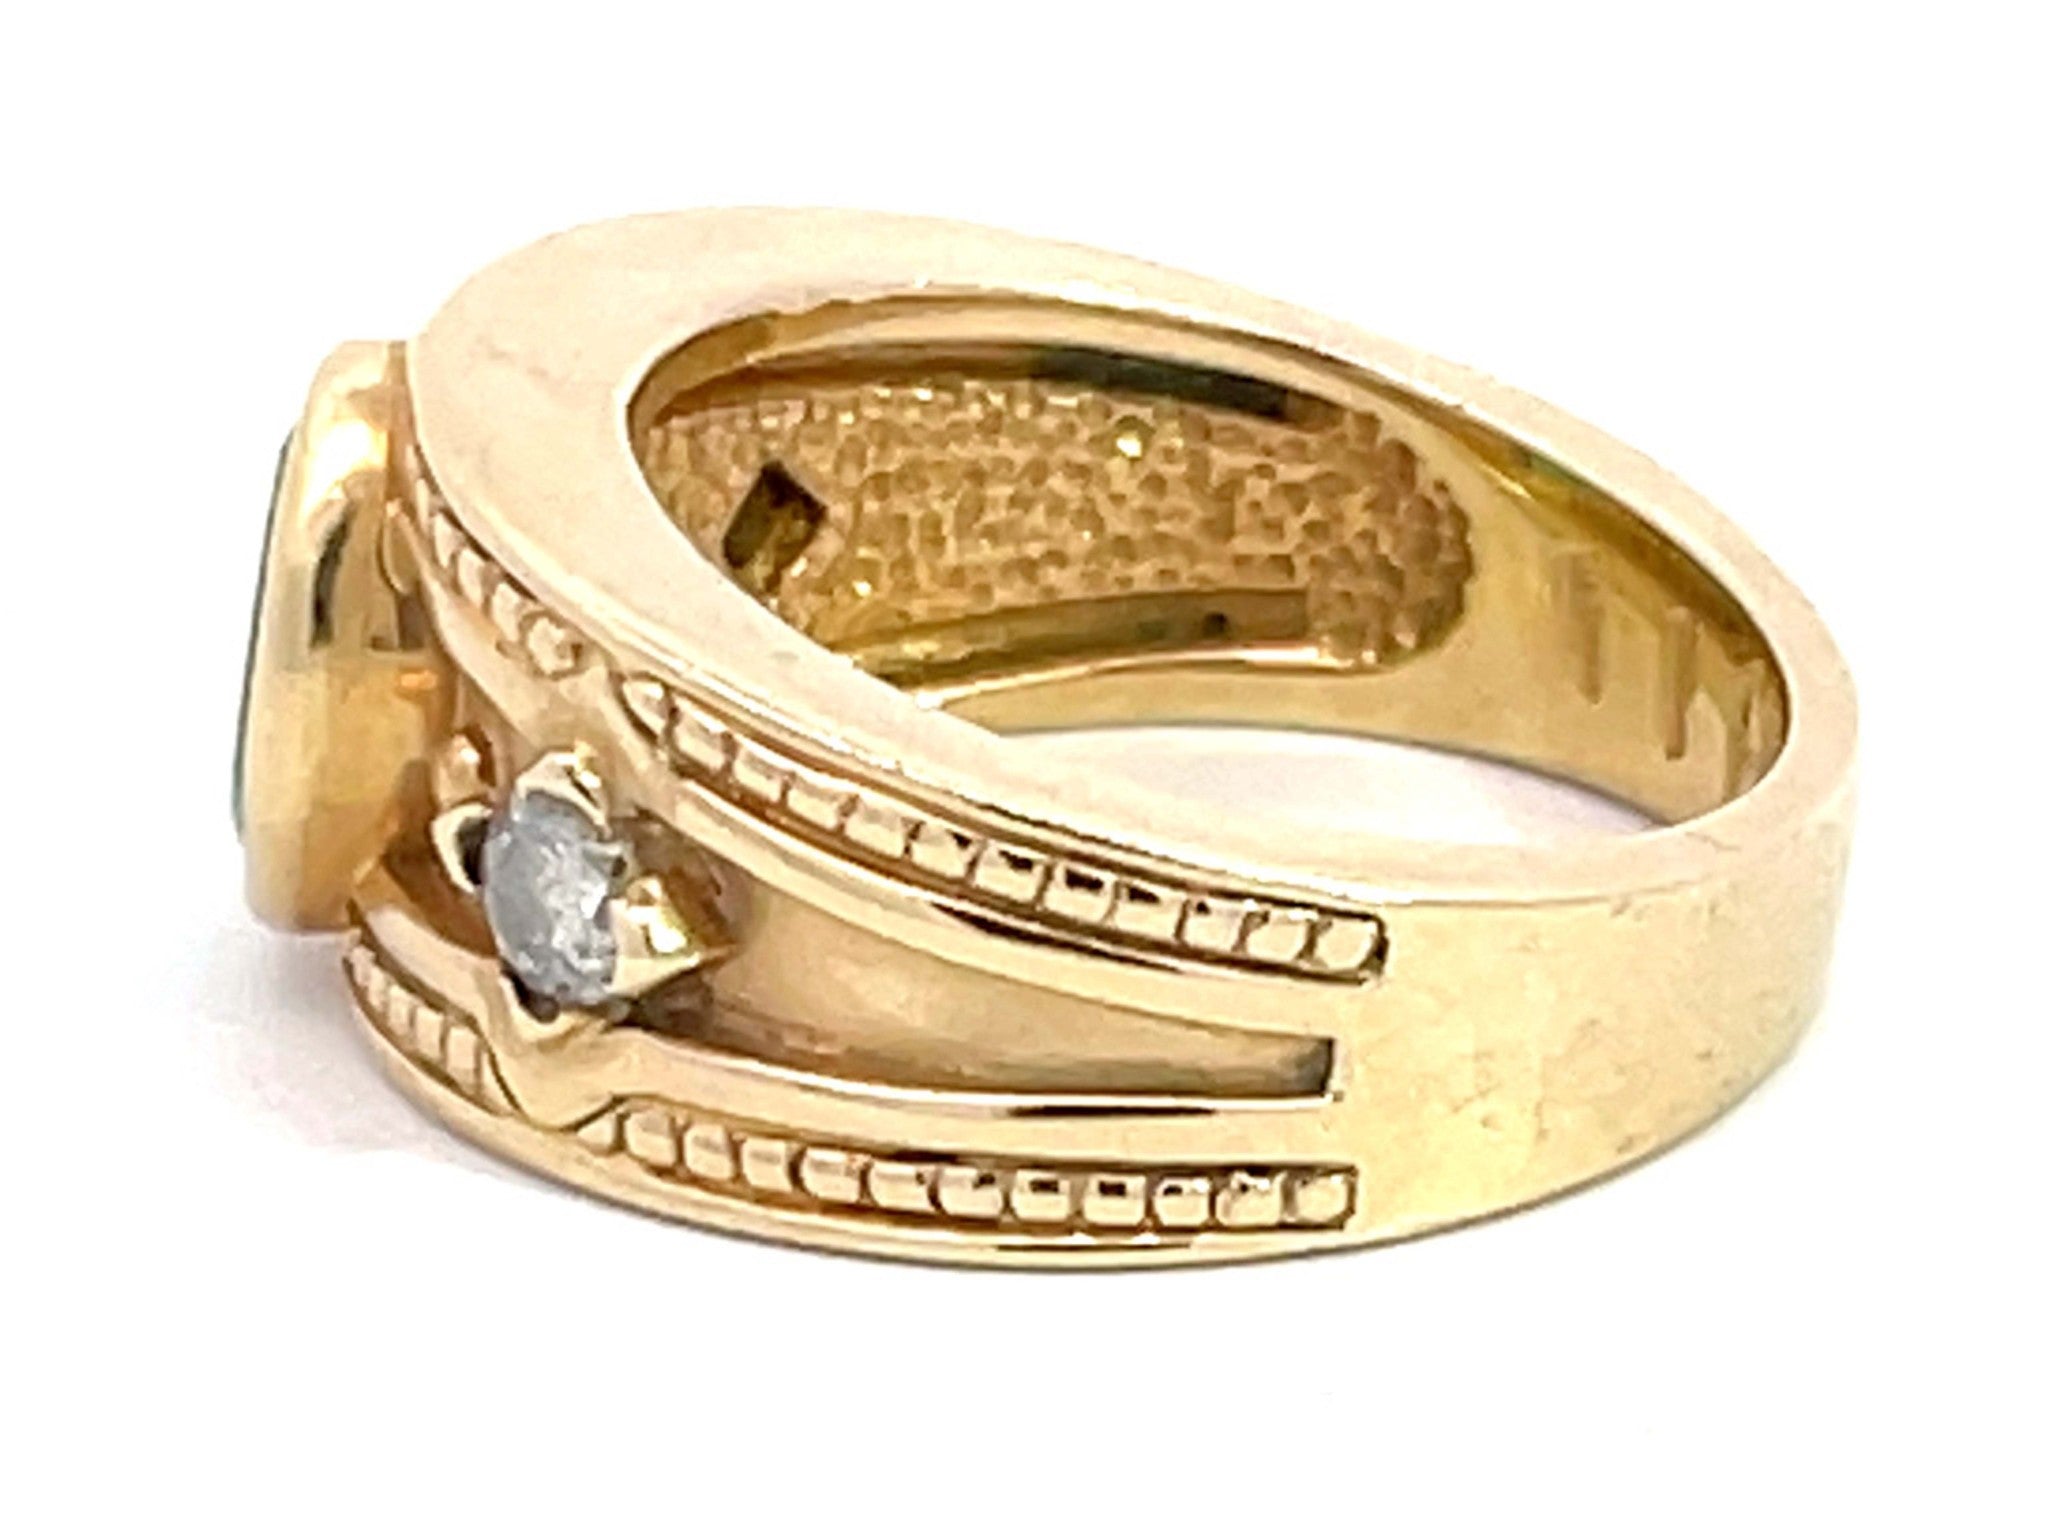 Green Emerald and Diamond Cigar Band Ring in 14k Yellow Gold